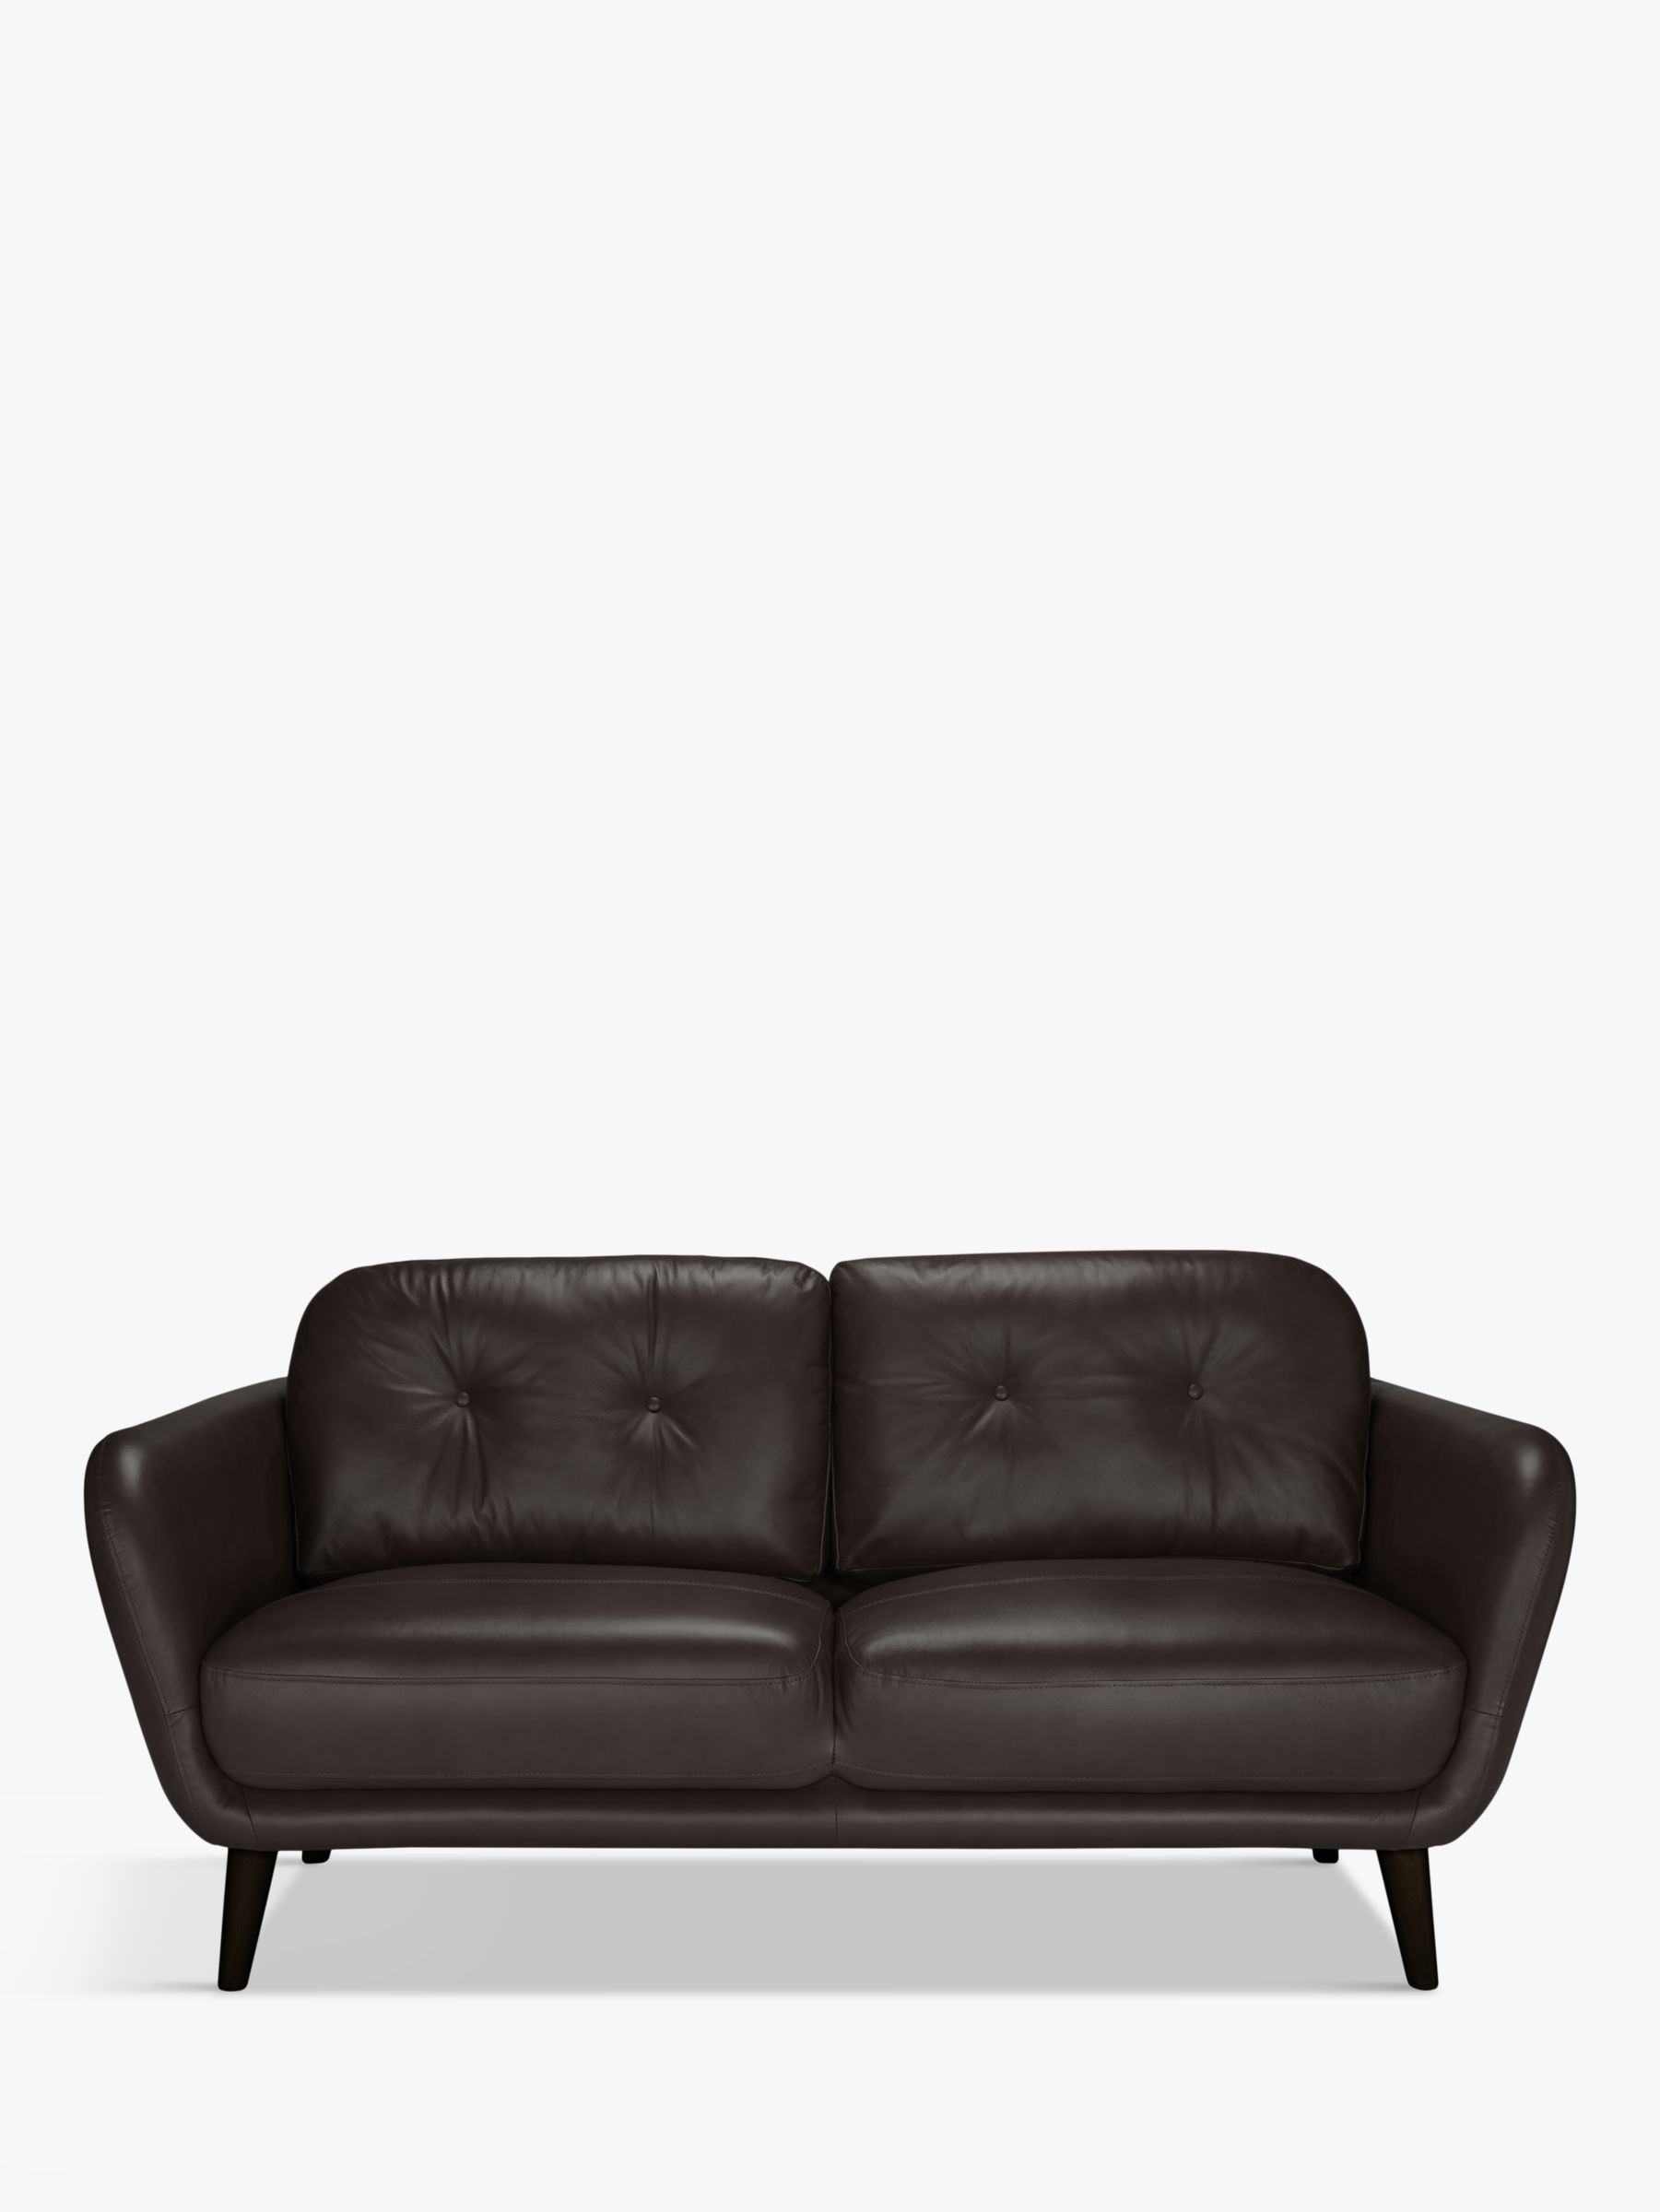 Black Leather Couch Repair • Variant Living  Best leather sofa, Leather  repair, Leather furniture repair